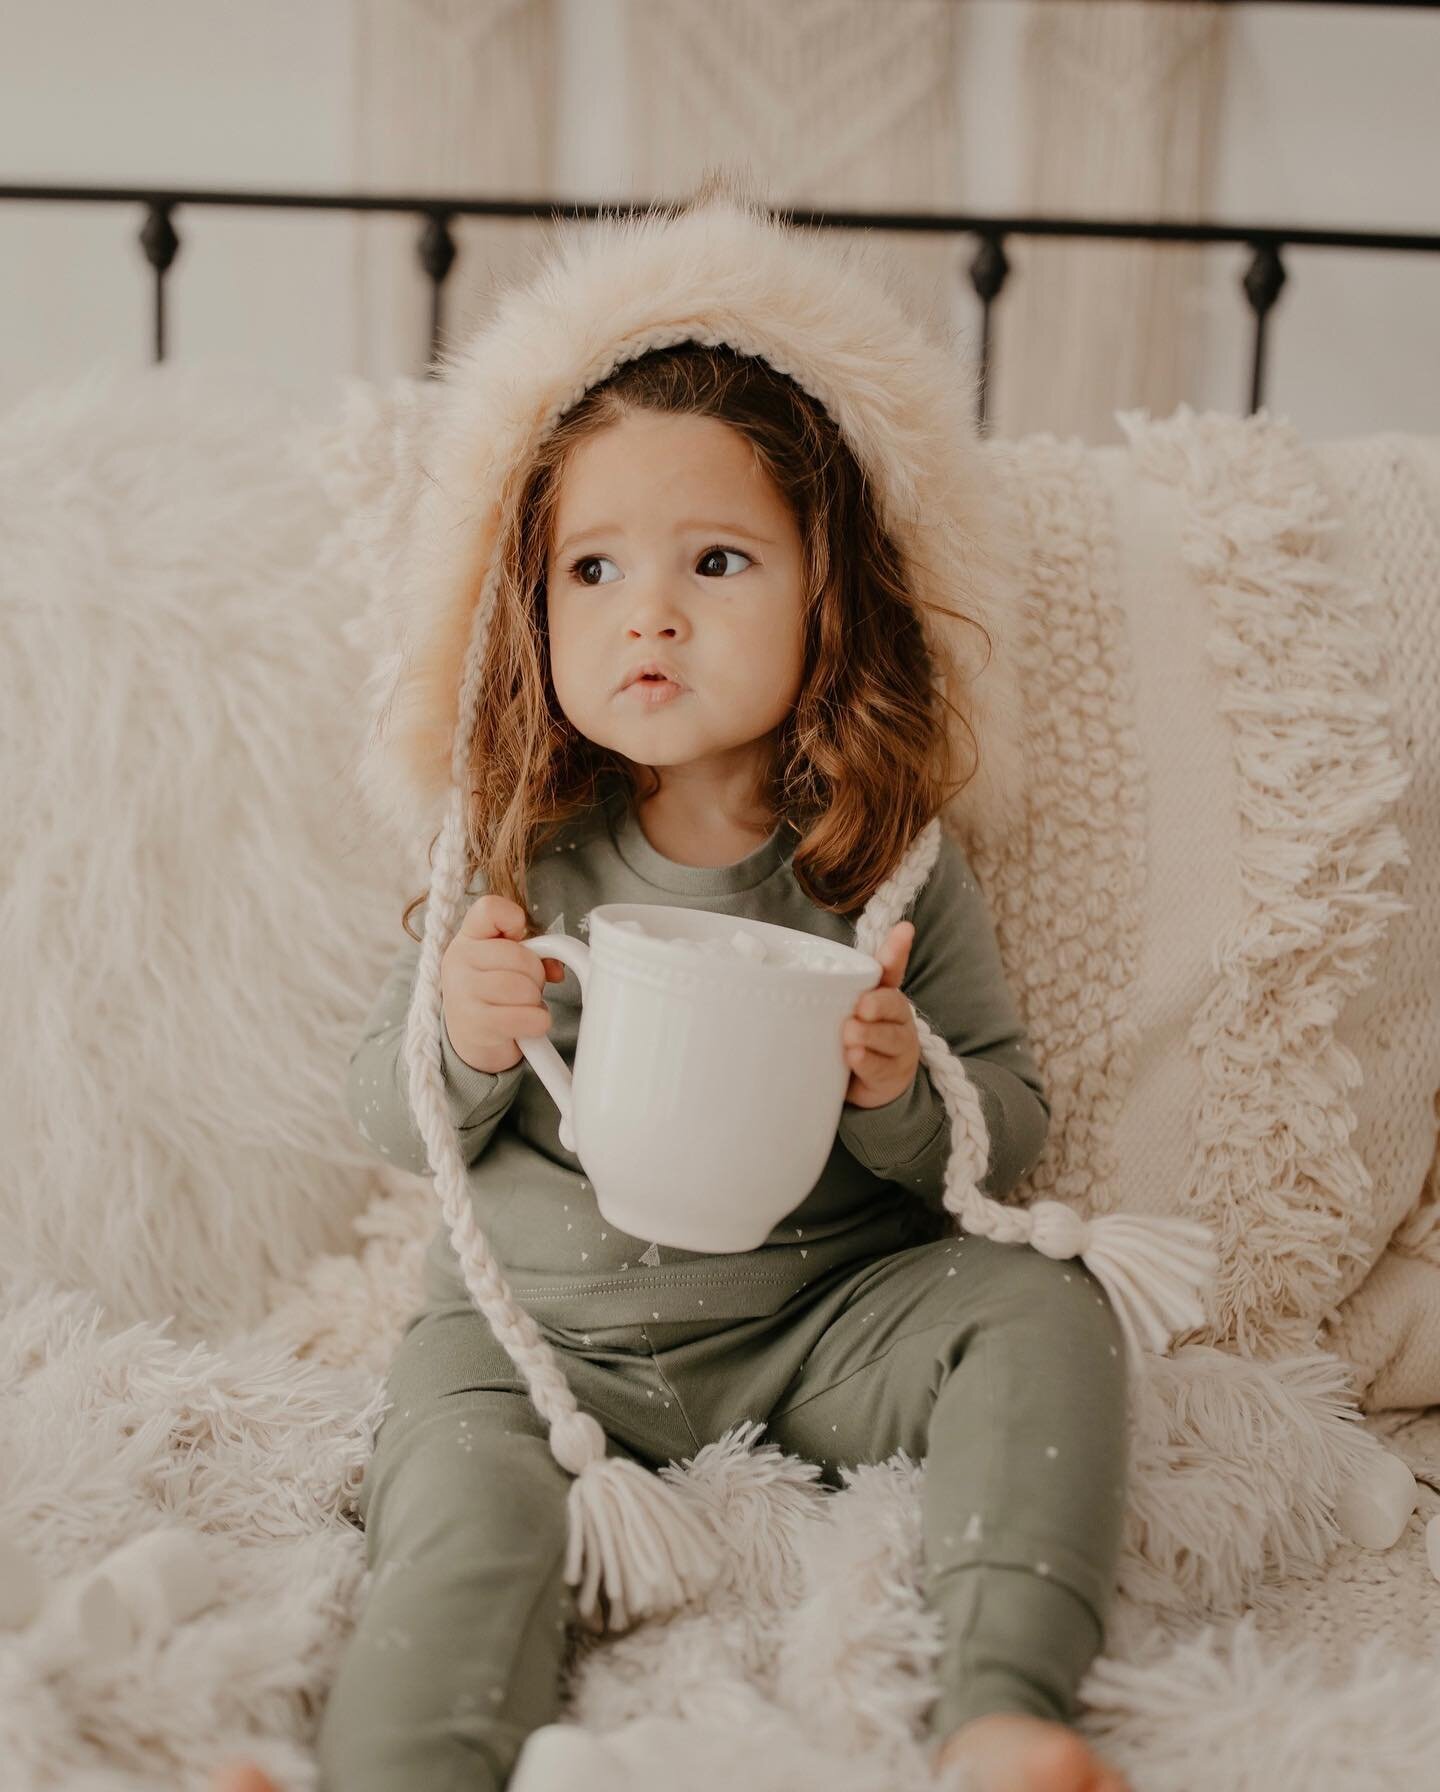 LOW STOCK ALERT! We only have 5 of our Organic Winter Pine Jammies Left and then they are totally gone! 
⠀⠀⠀⠀⠀⠀⠀⠀⠀
❄️ Use code WINTER20 to save! ❄️
⠀⠀⠀⠀⠀⠀⠀⠀⠀
Don't miss out on these gorgeous, classy and cozy jammies for the winter season!
⠀⠀⠀⠀⠀⠀⠀⠀⠀
#